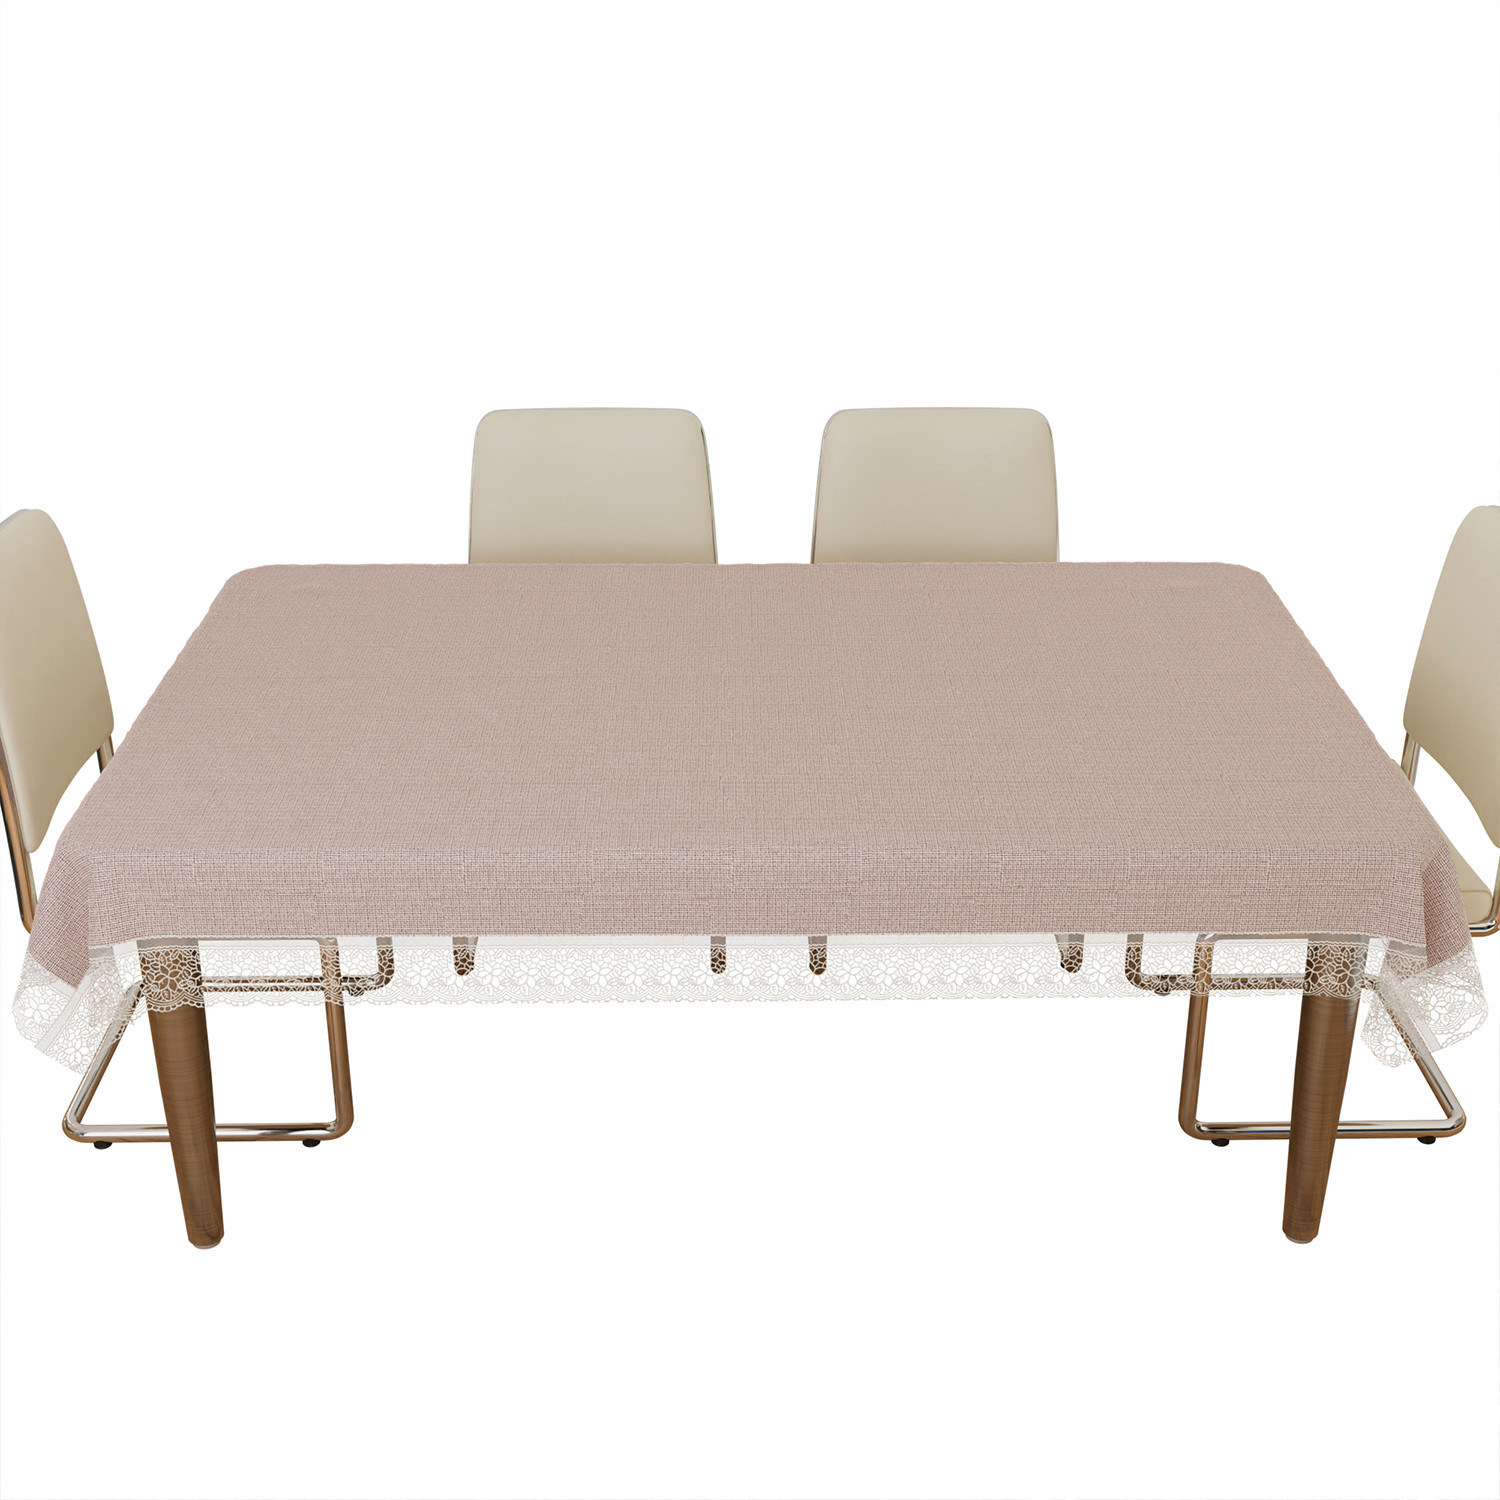 Kuber Industries Dining Table Cover | Kitchen Dining Tablecloth | 6 Seater Dining Table Cover | Dining Table Cover for Hall Décor | Plain Texture Tablecloth | DTC | 60x90 | Beige